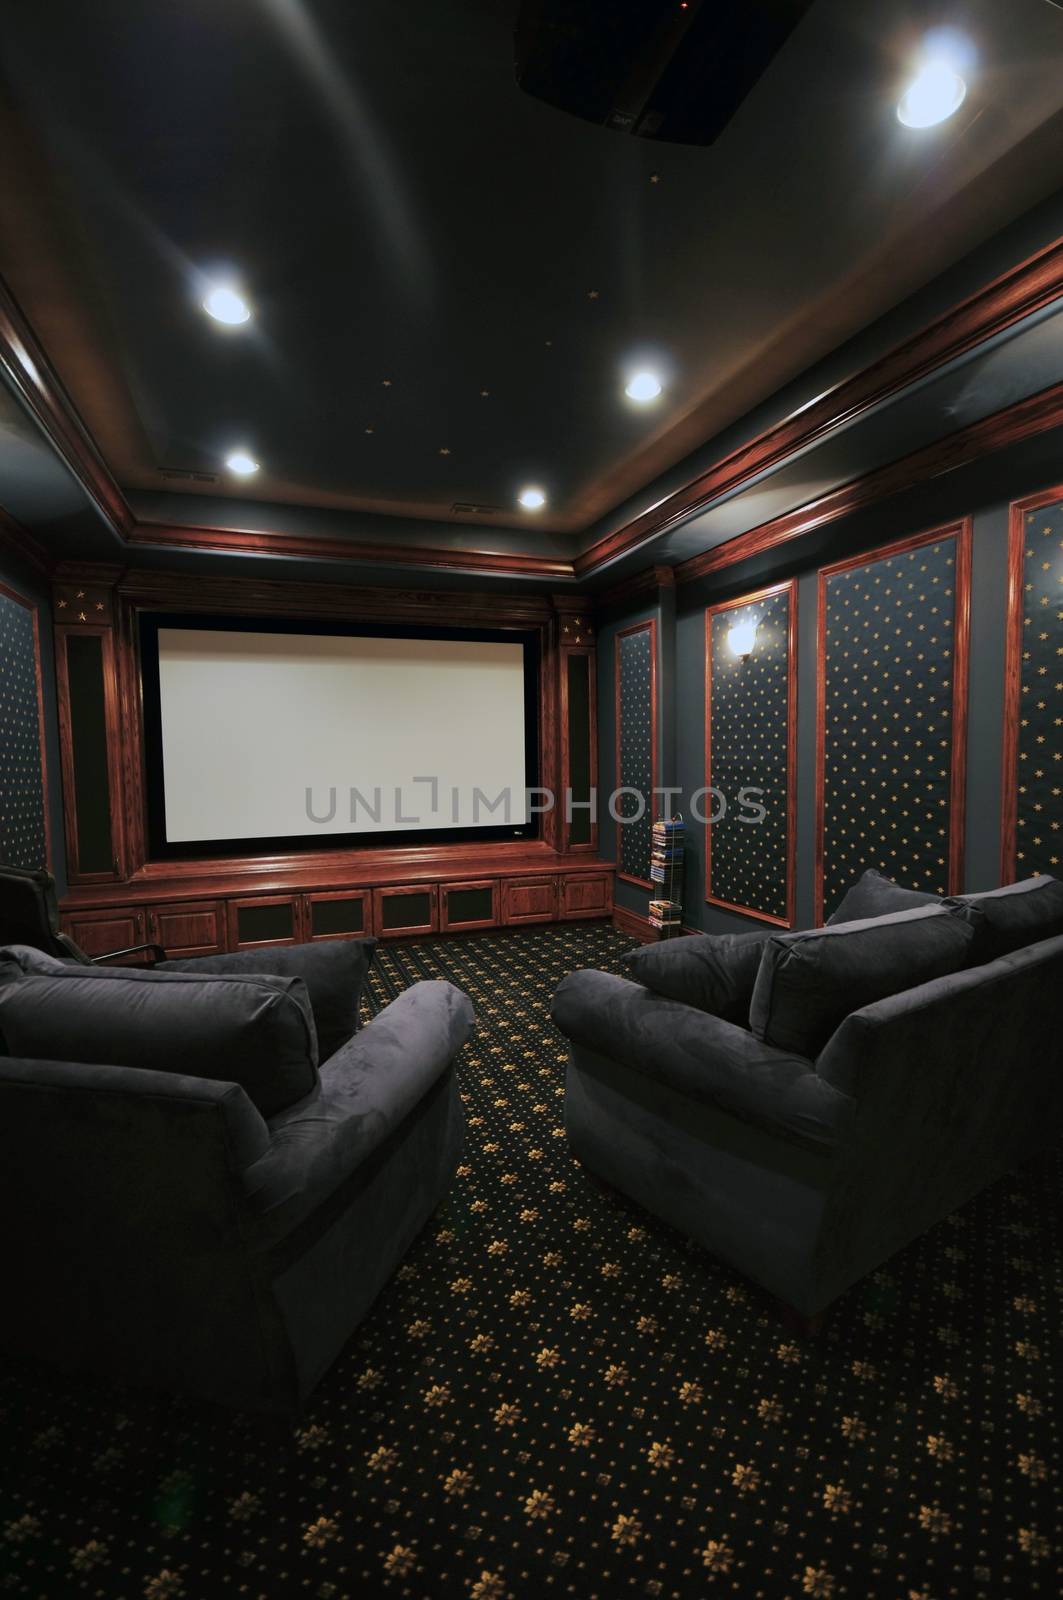 Home Theatre in the Luxury Basement Room. Vertical Photo